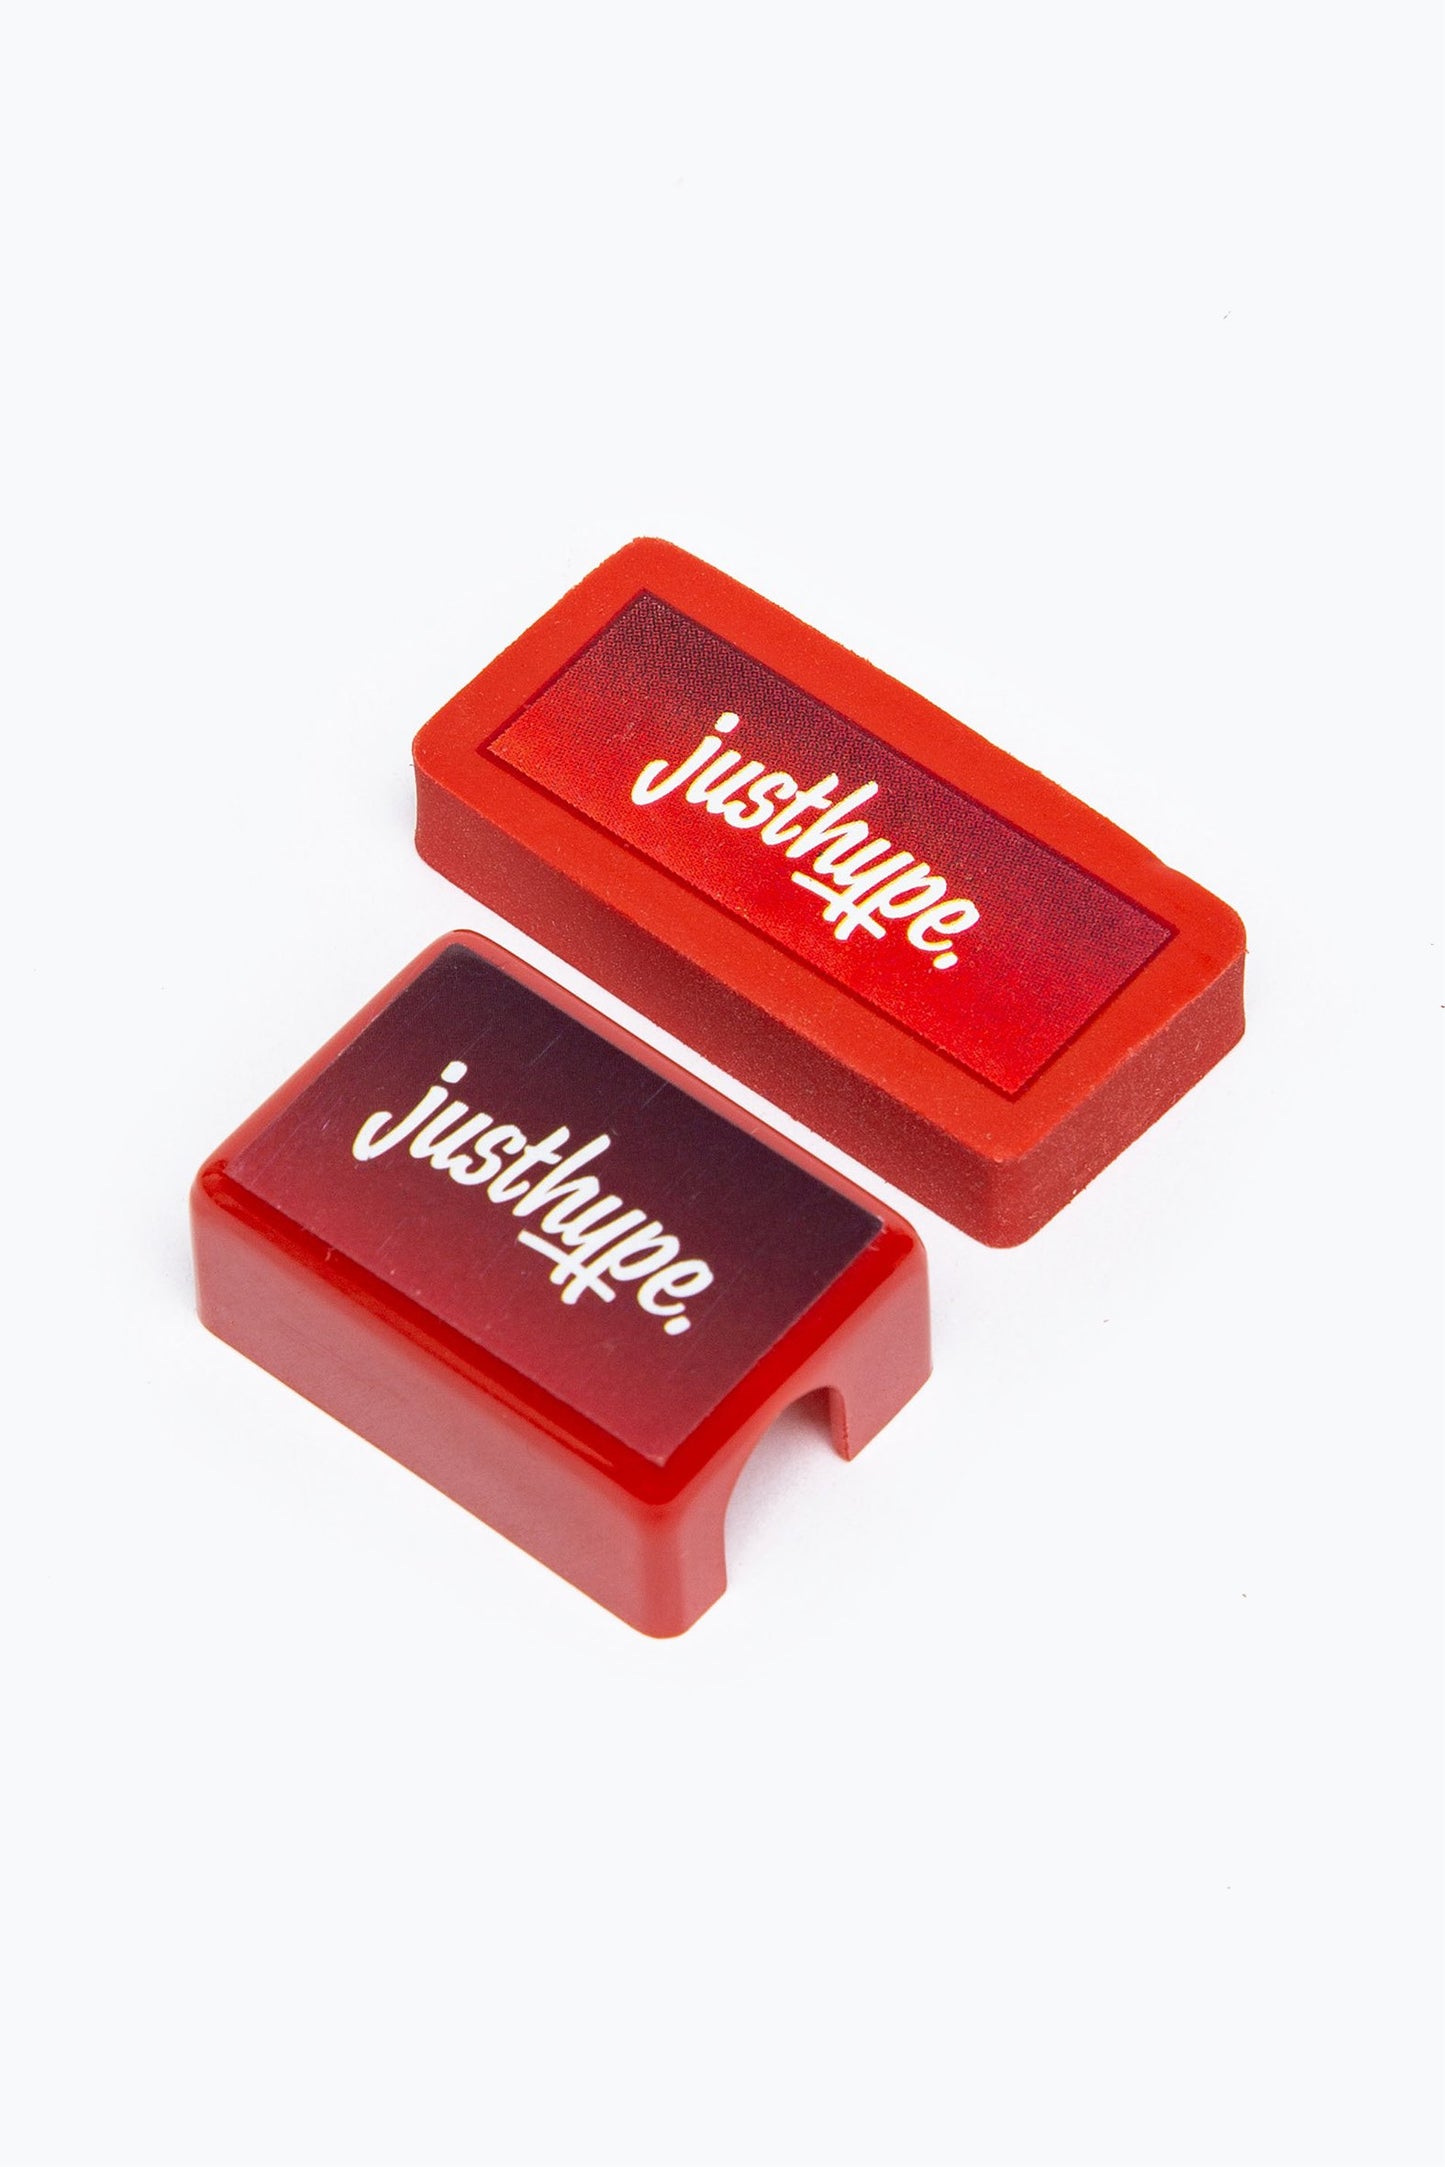 HYPE RED FADE STATIONARY SET